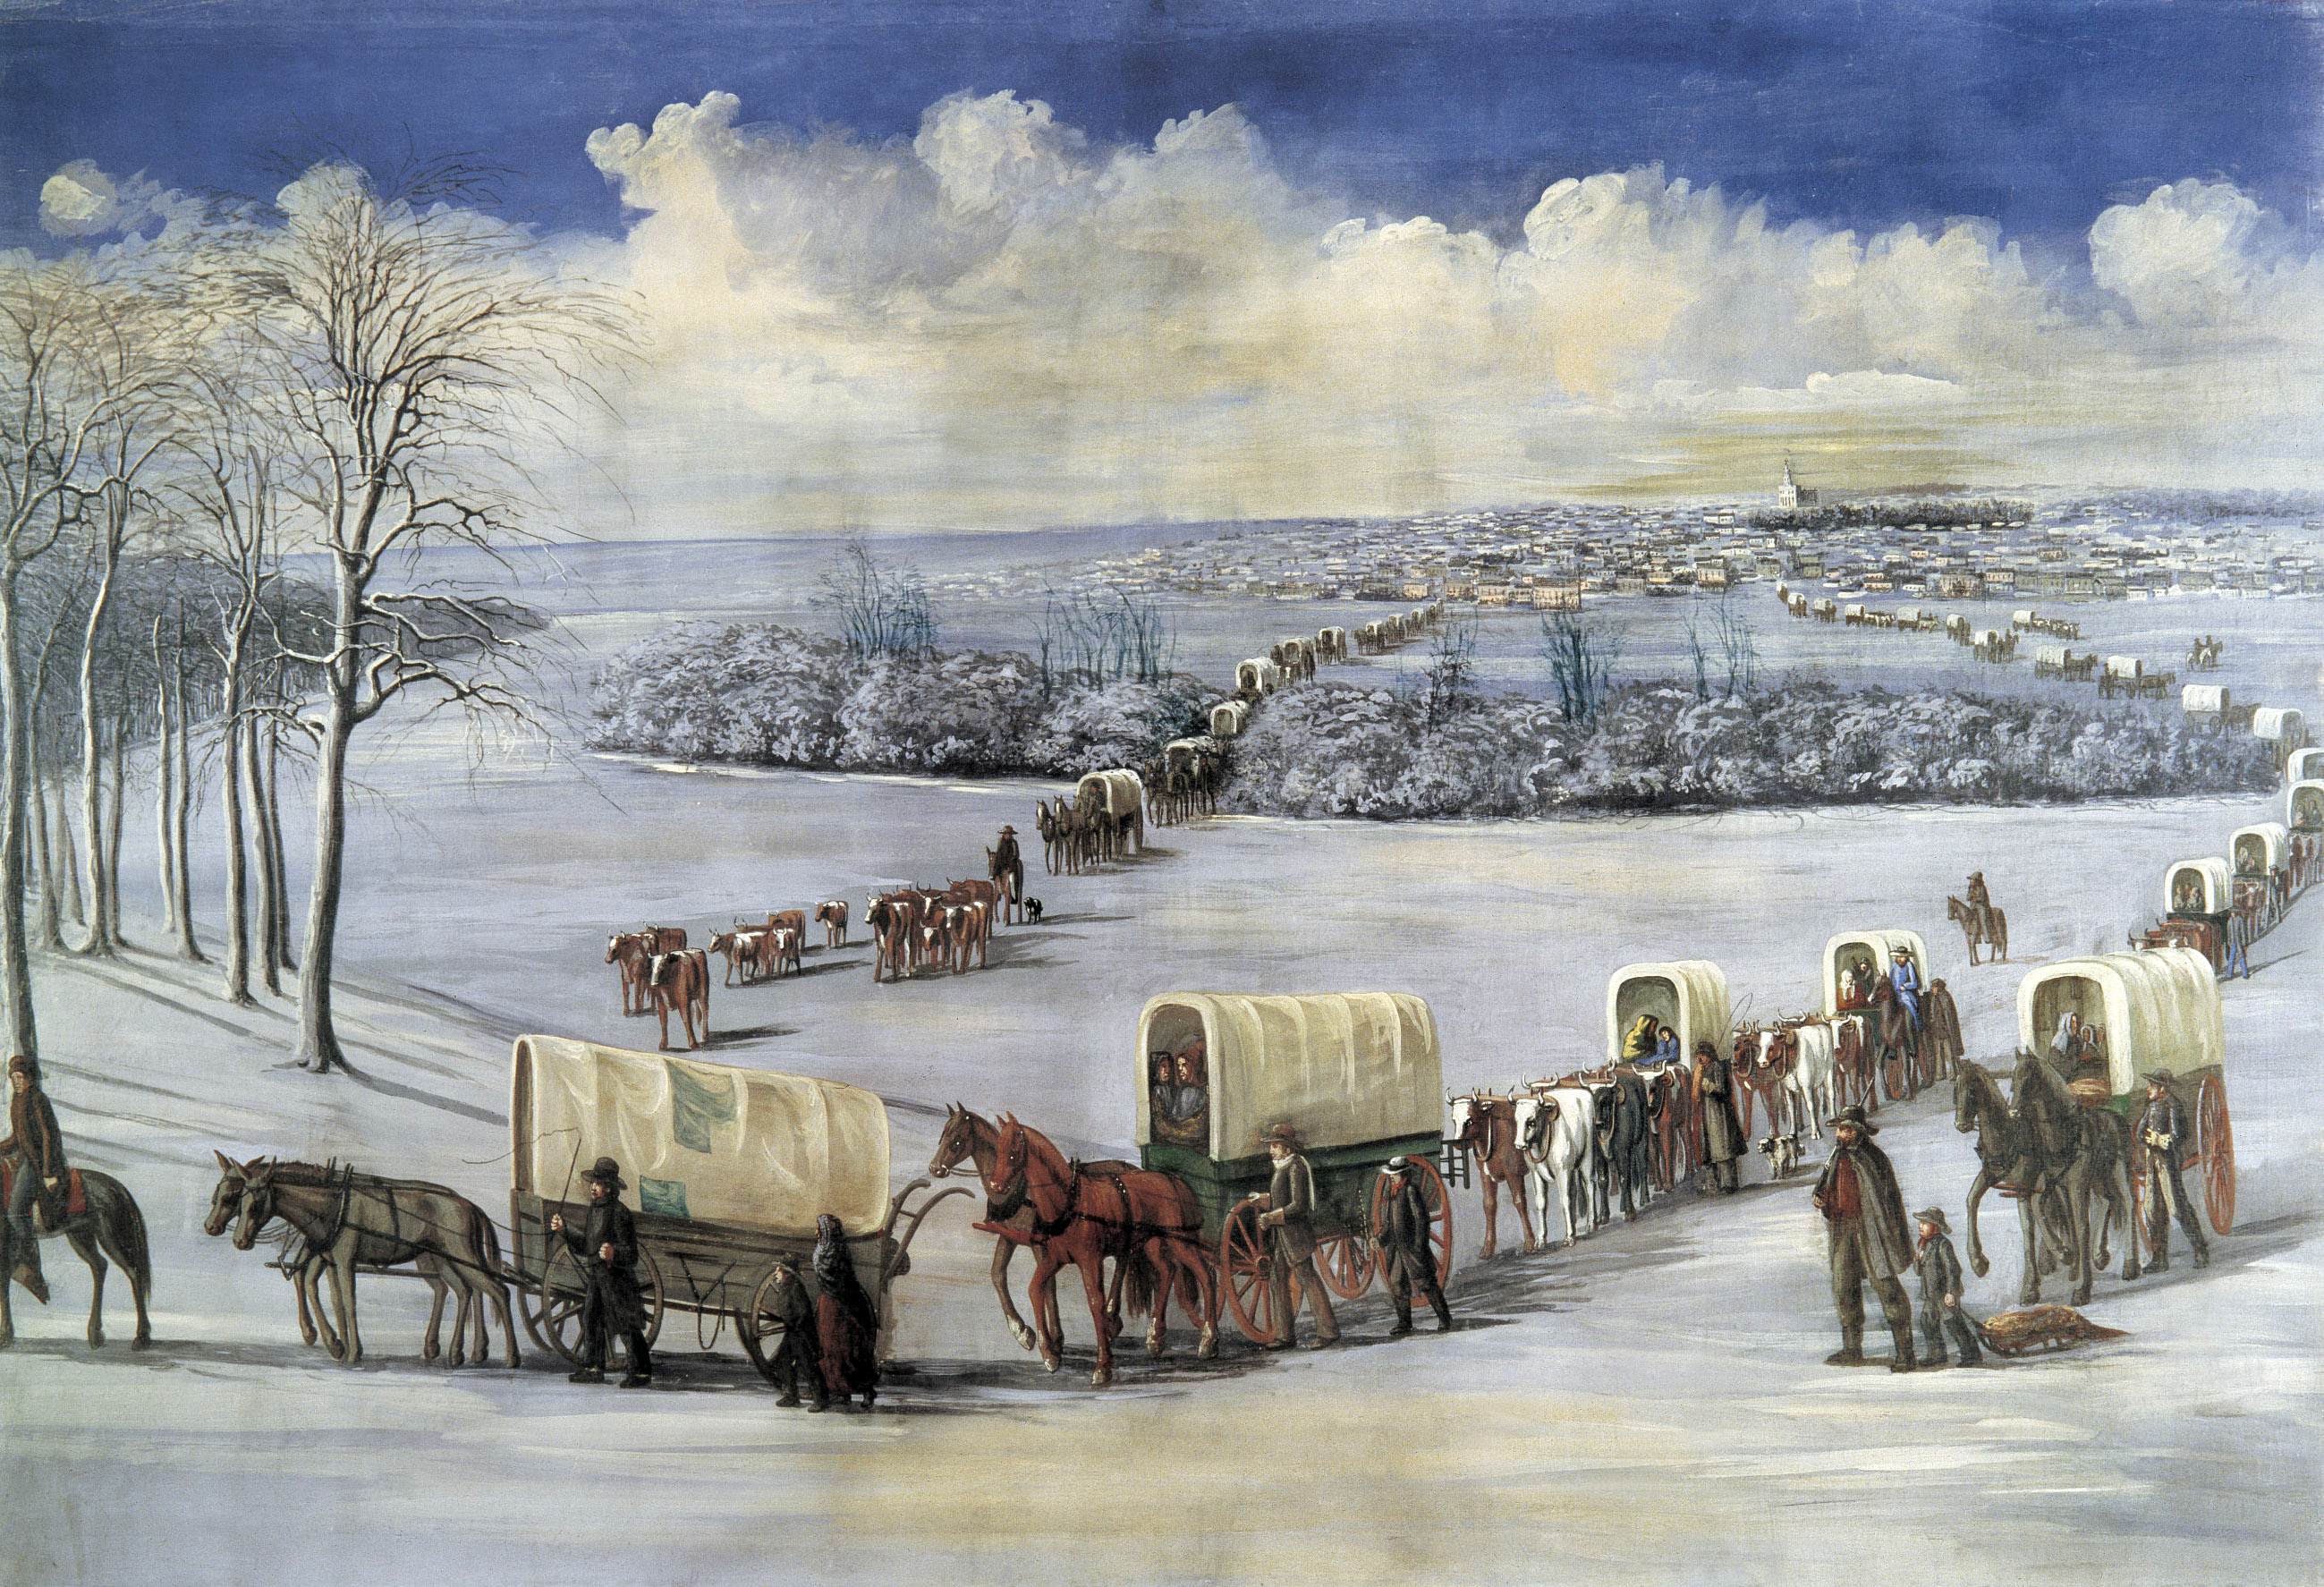 A painting of a large group of covered wagons traveling across a winter landscape.